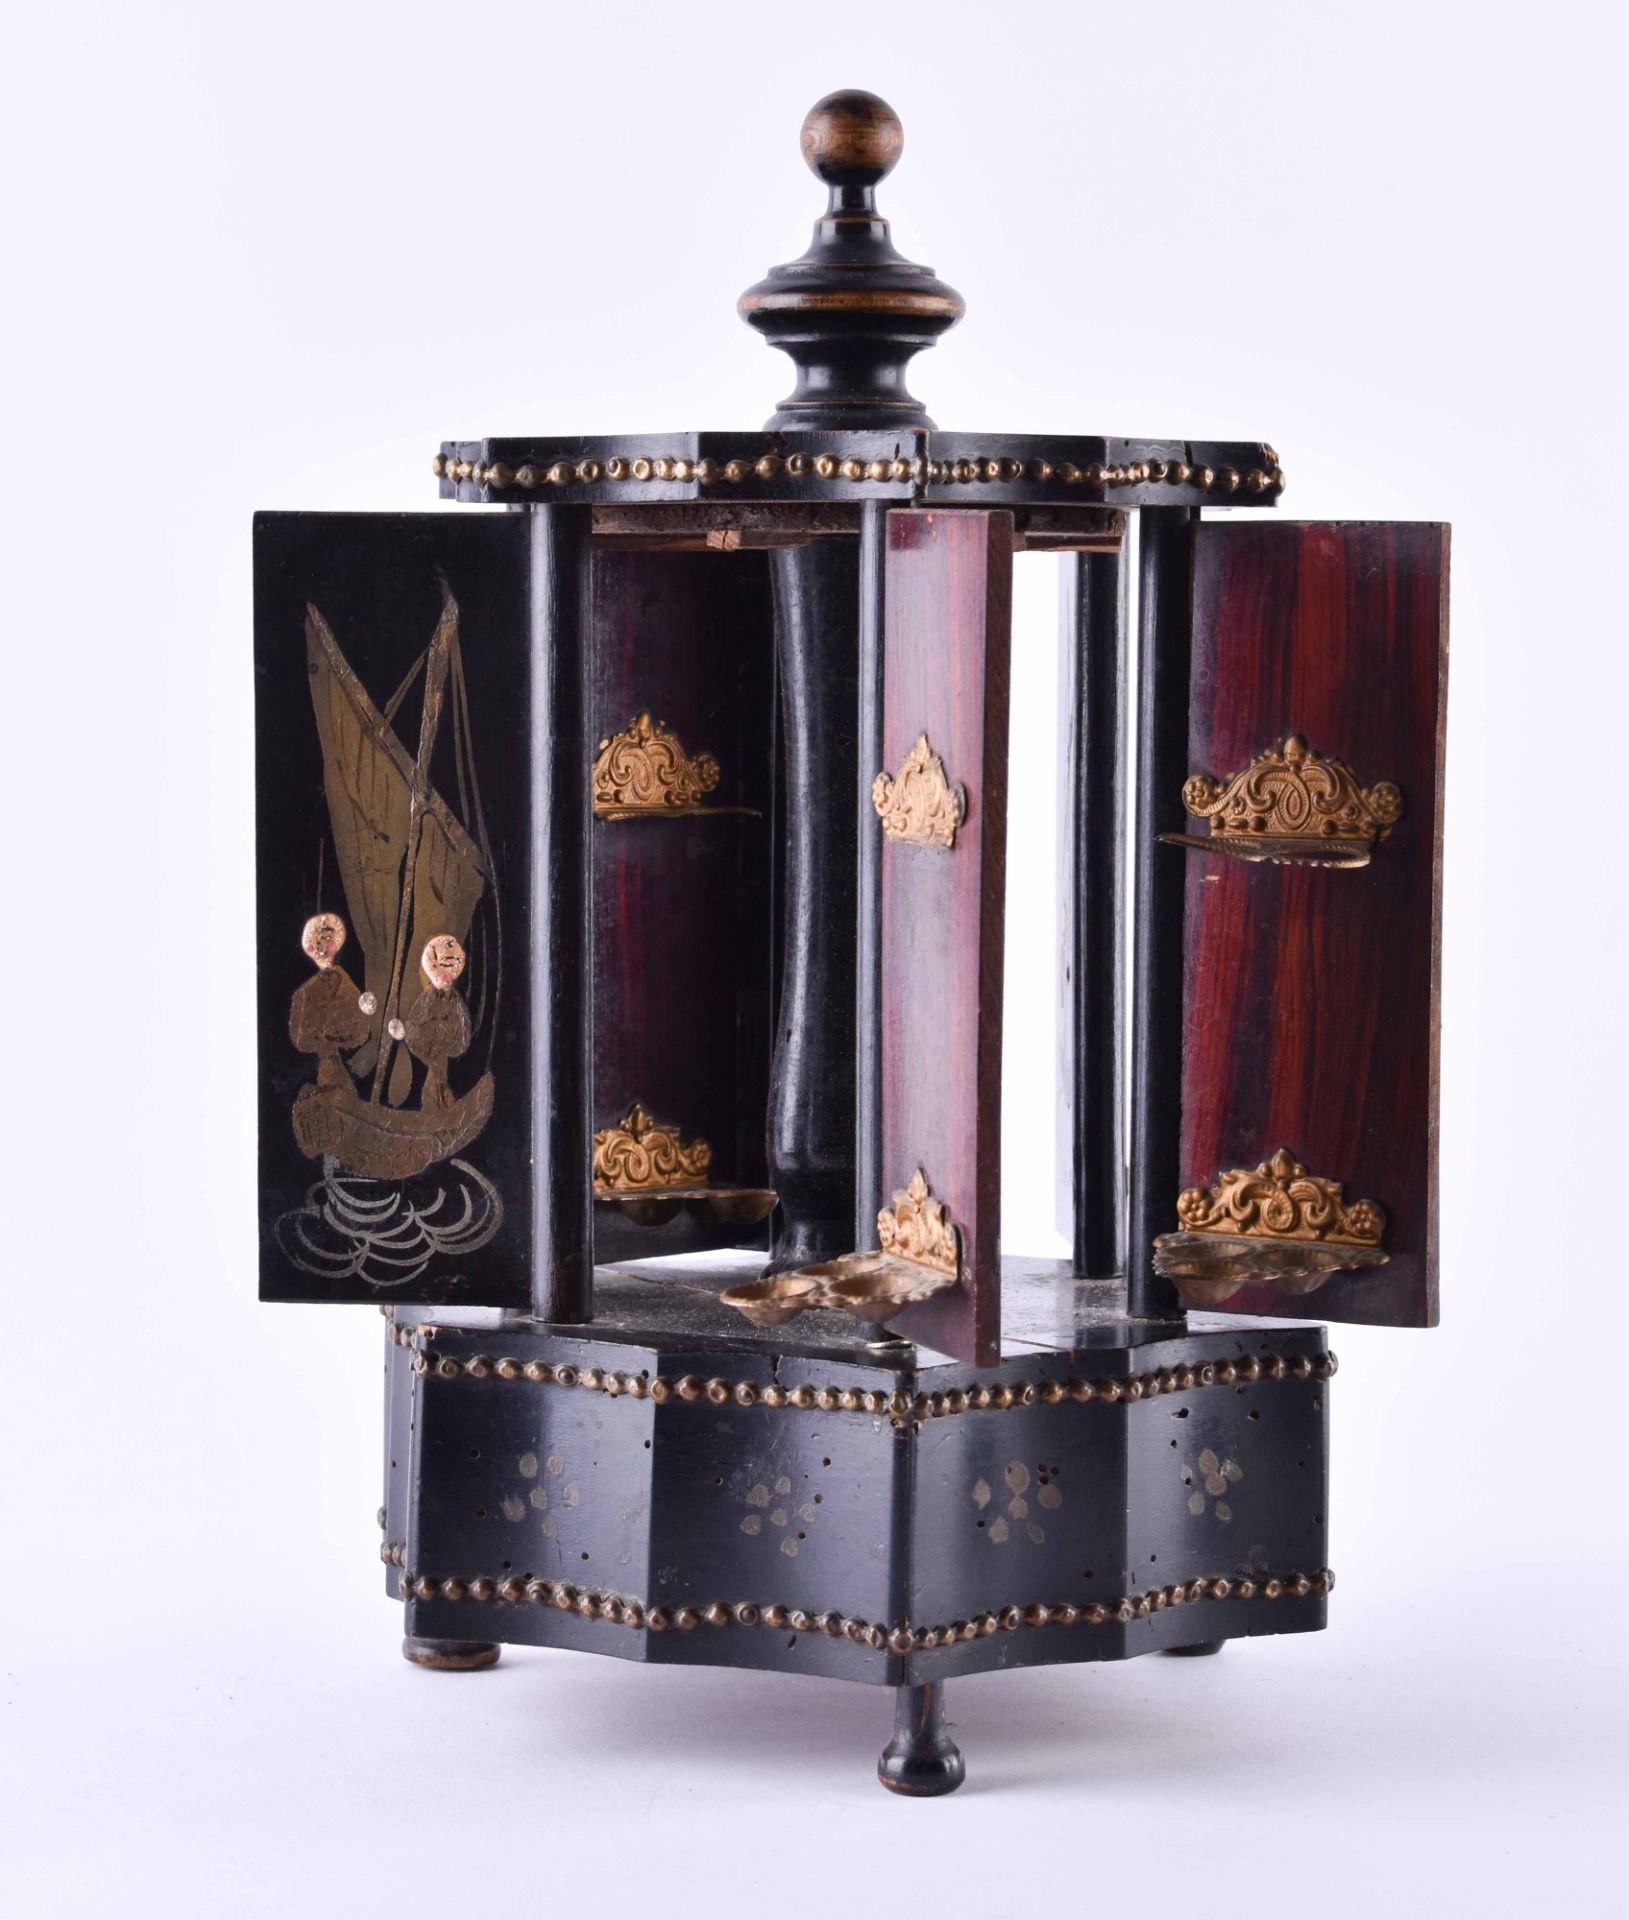 Cigar holder with music box probably England 19th century - Image 3 of 4